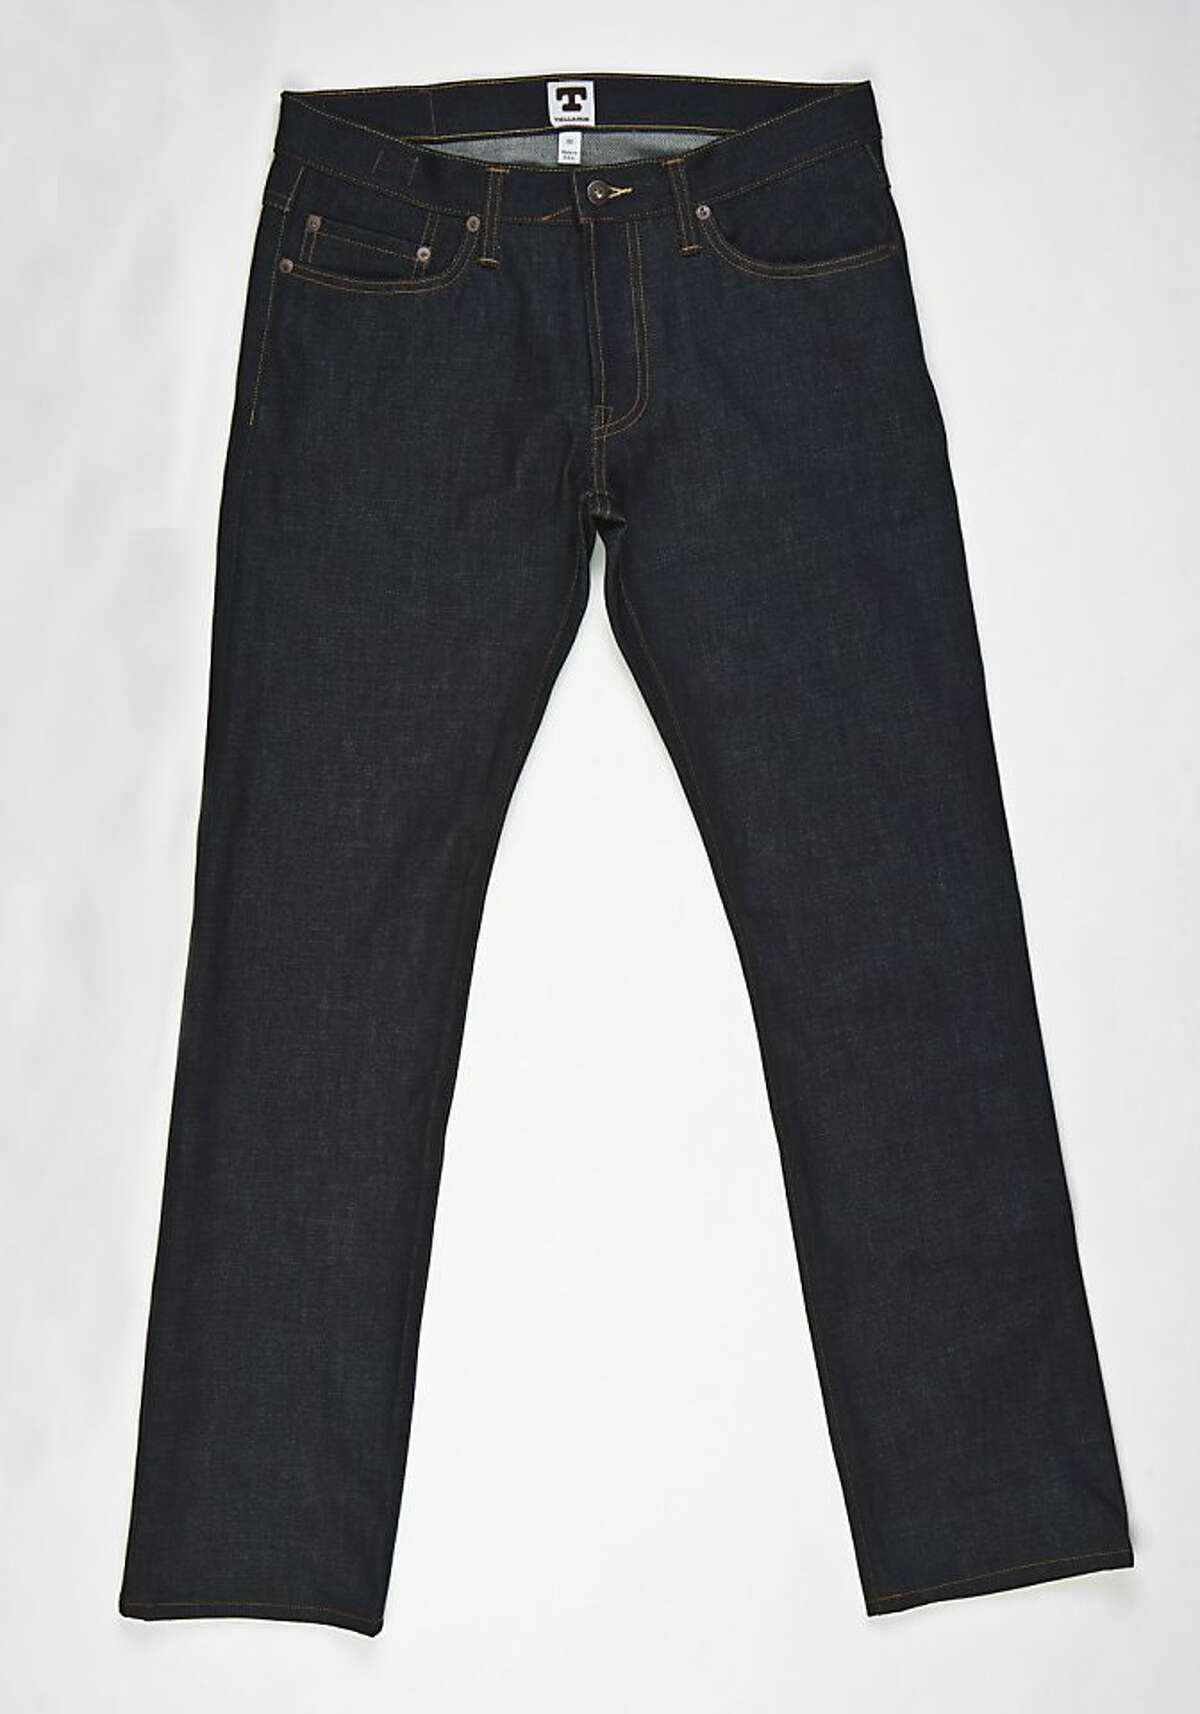 What makes these jeans worth $198?